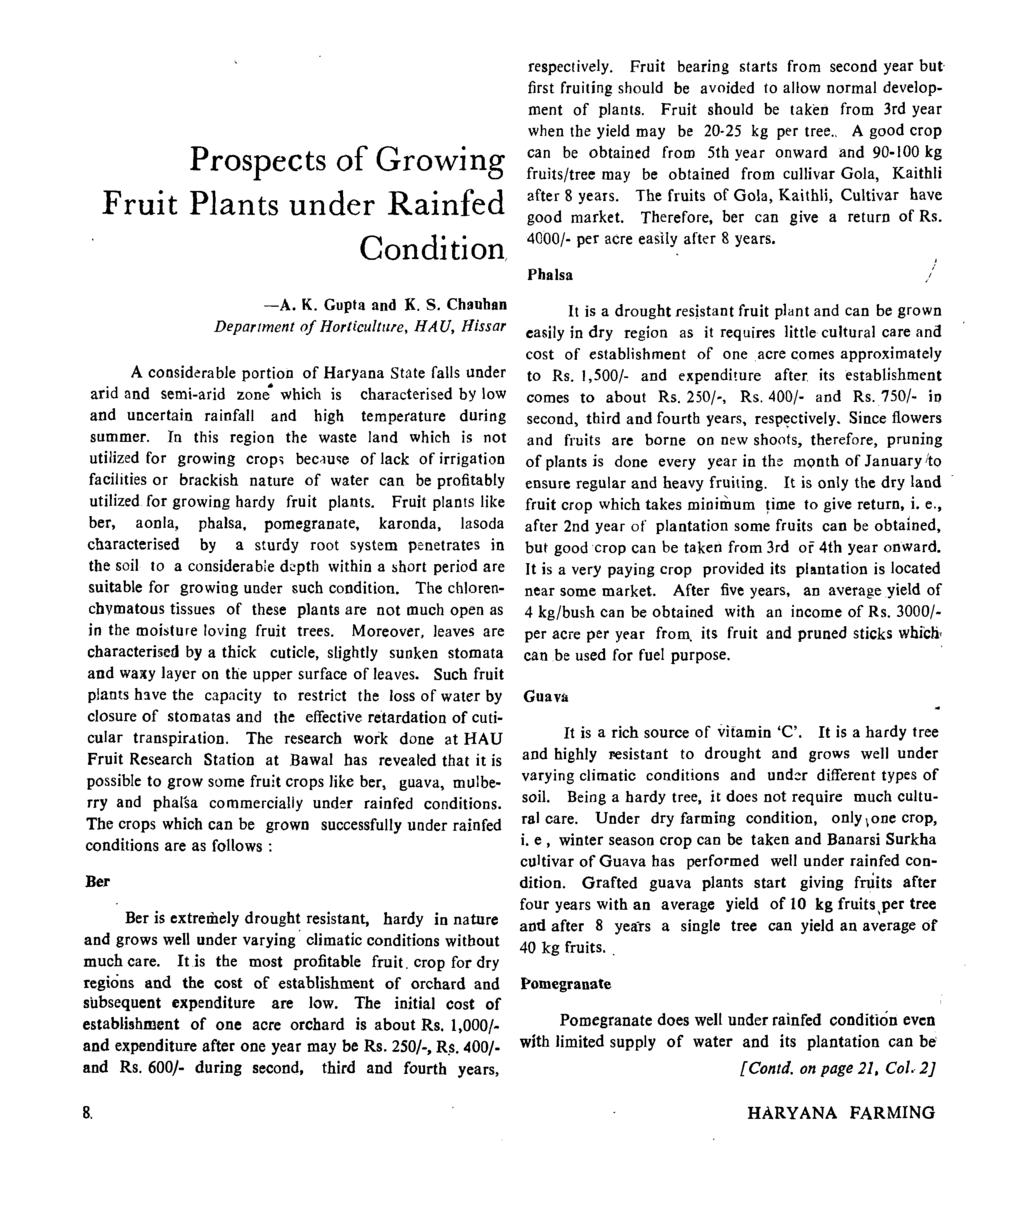 Prospects of Growing Fruit Plants under Rainfed Condition, -A. K. Gupta and K. S.